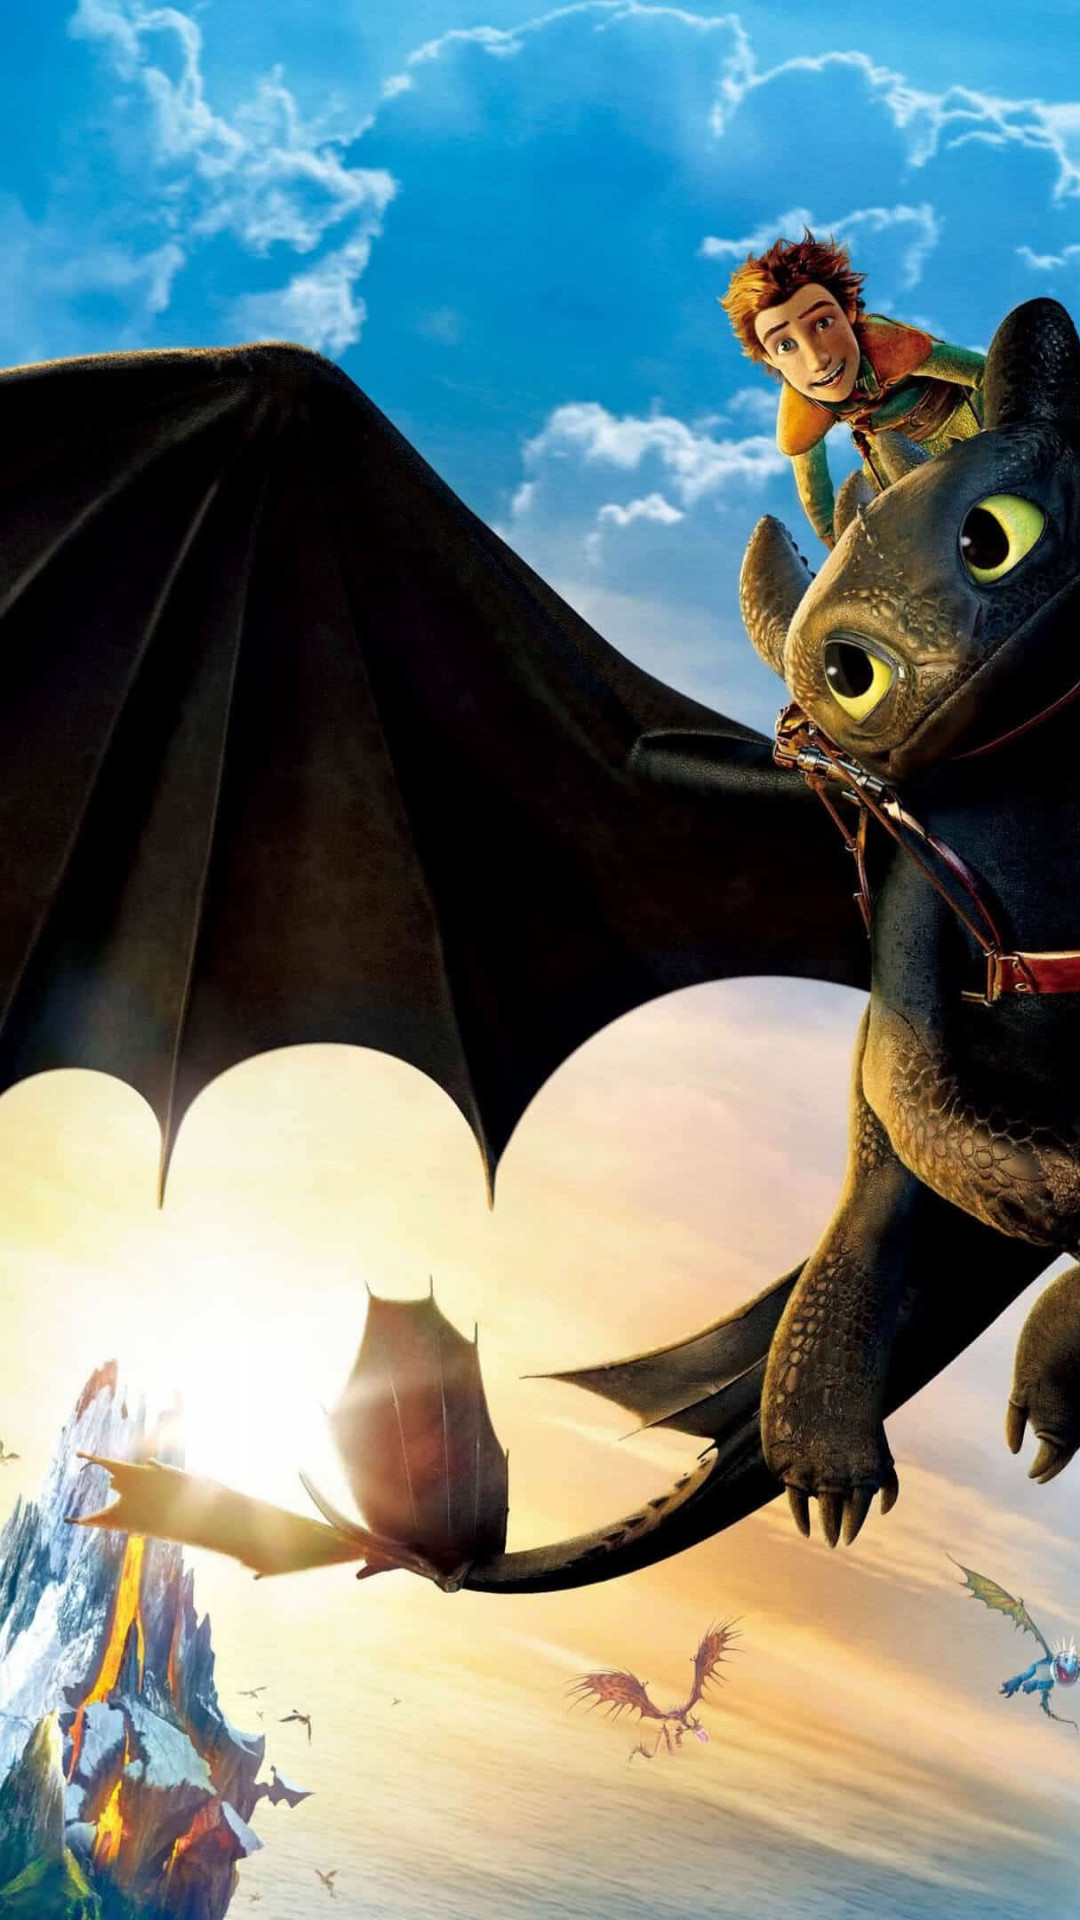 How To Train Your Dragon - Train Your Dragon The Hidden World - HD Wallpaper 